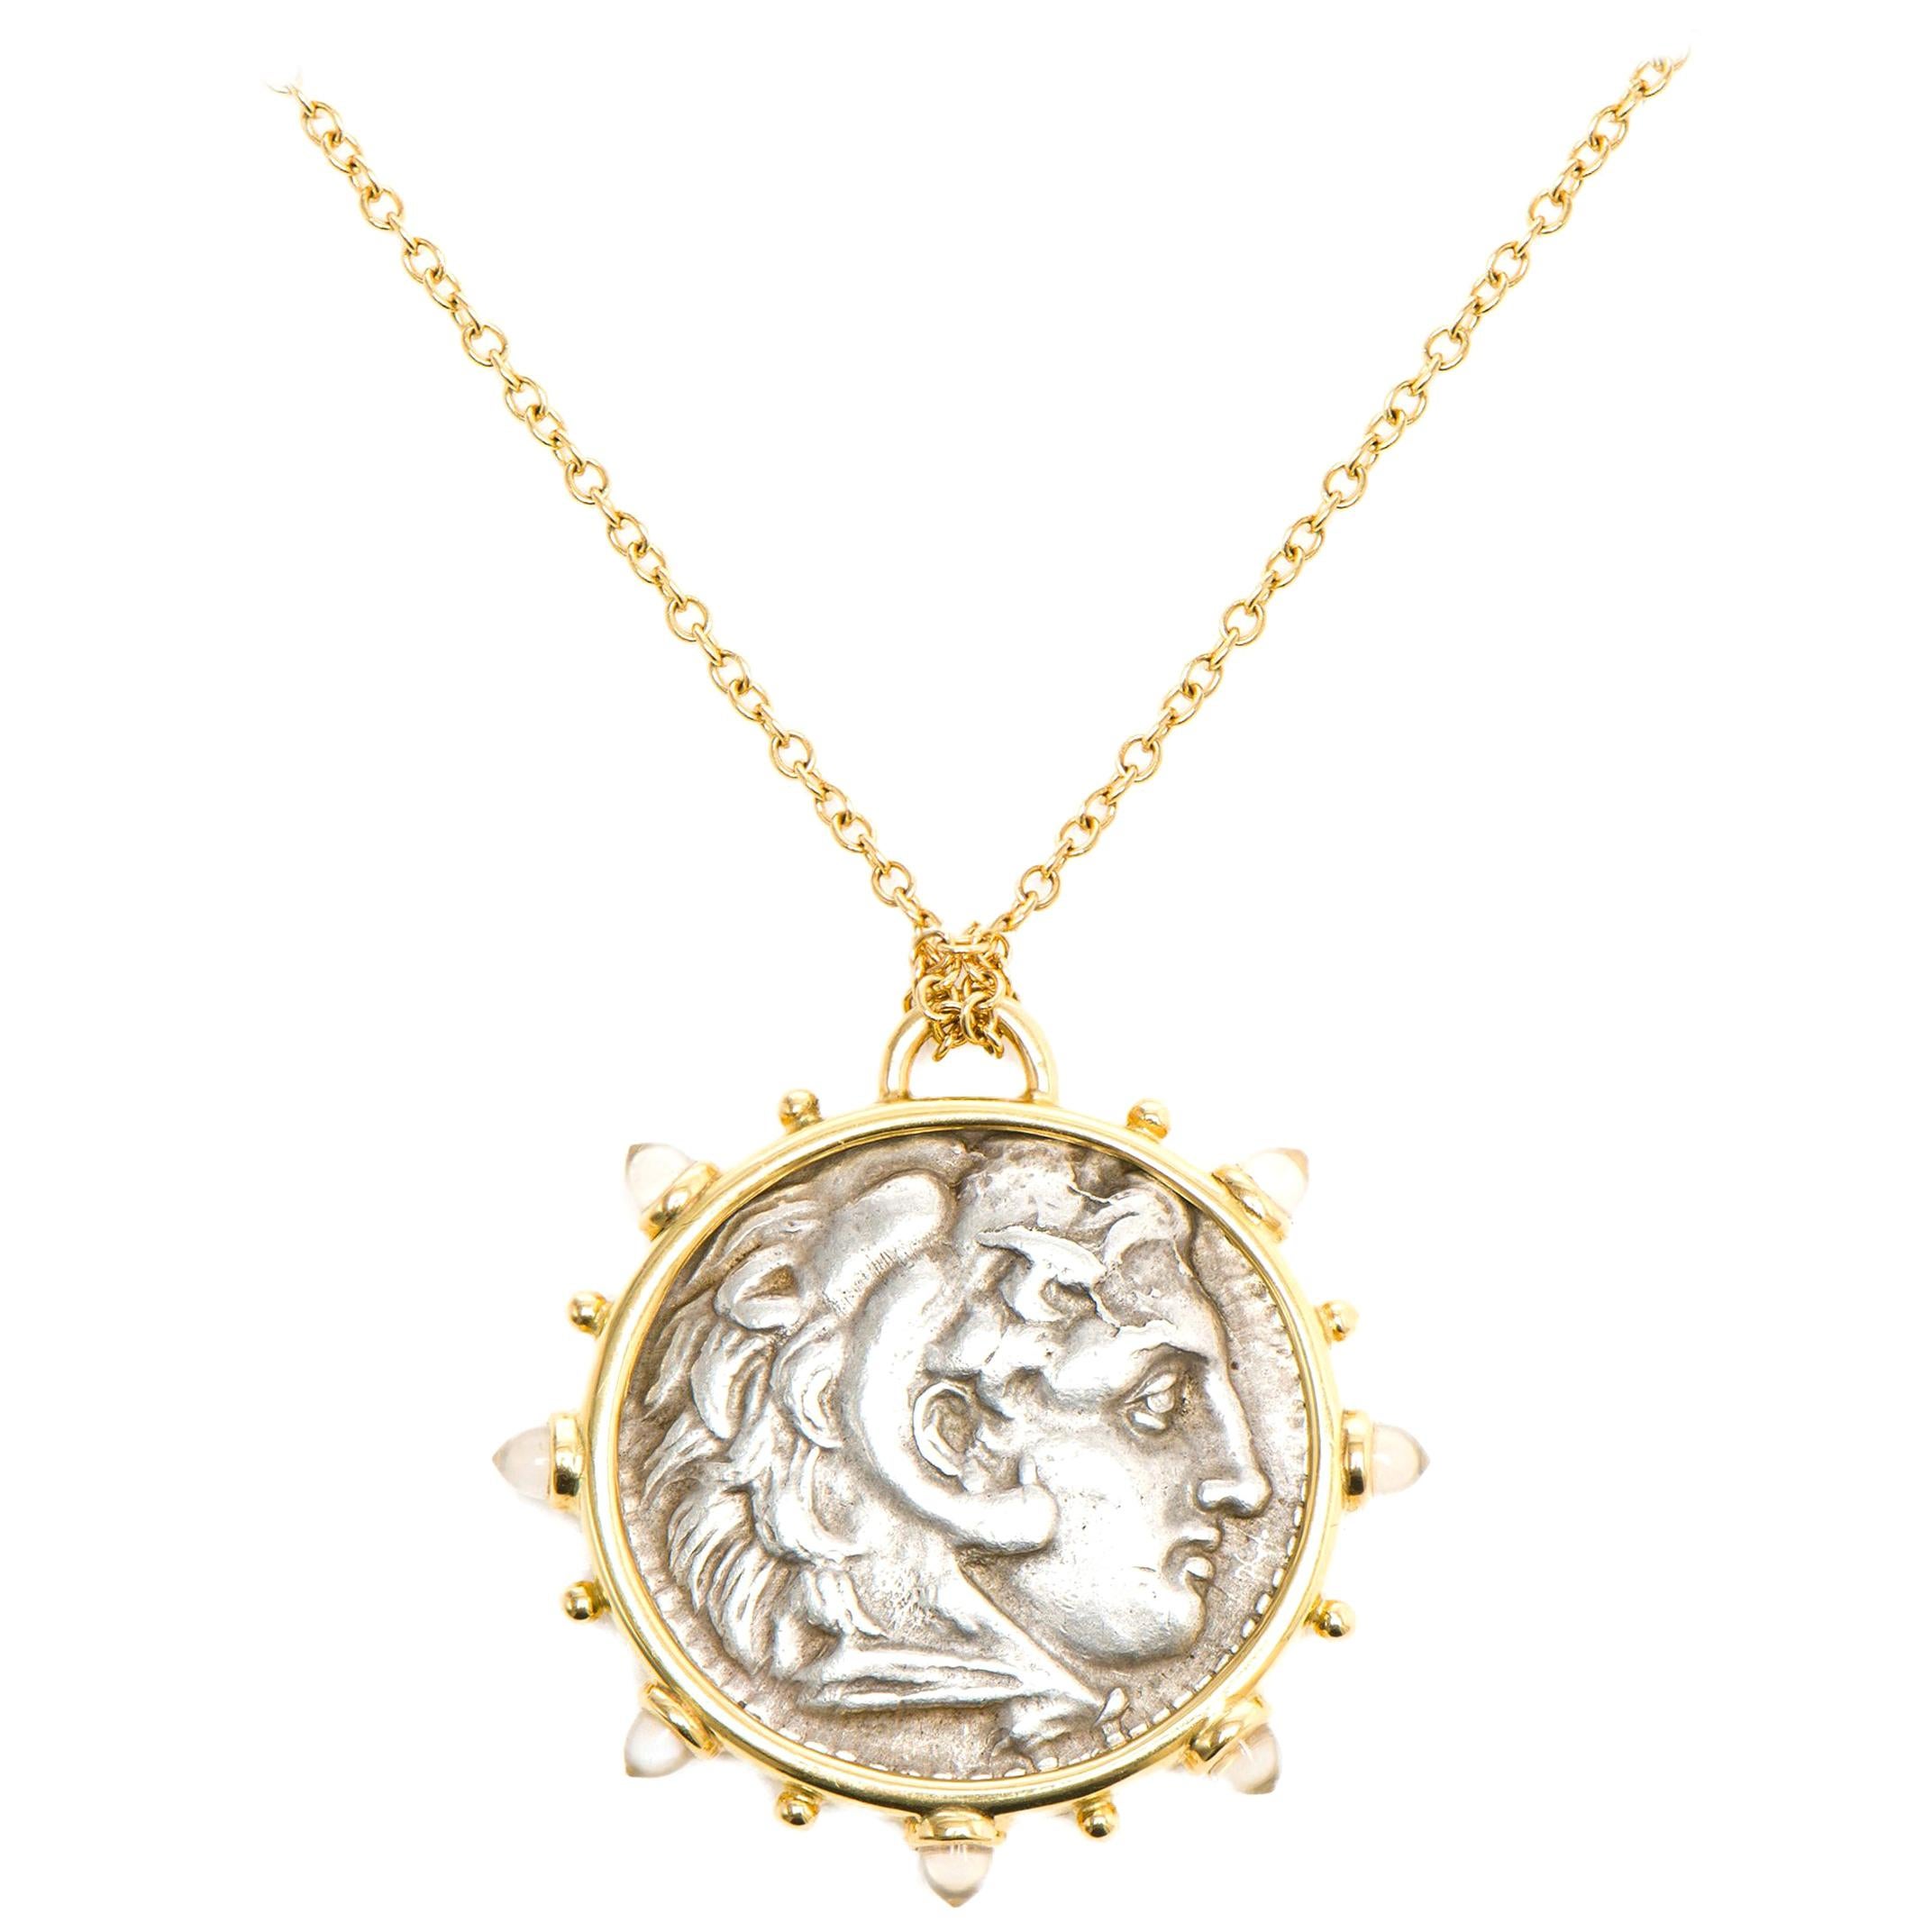 Dubini Alexander the Great Ancient Silver Coin Medallion Moonstone Gold Necklace